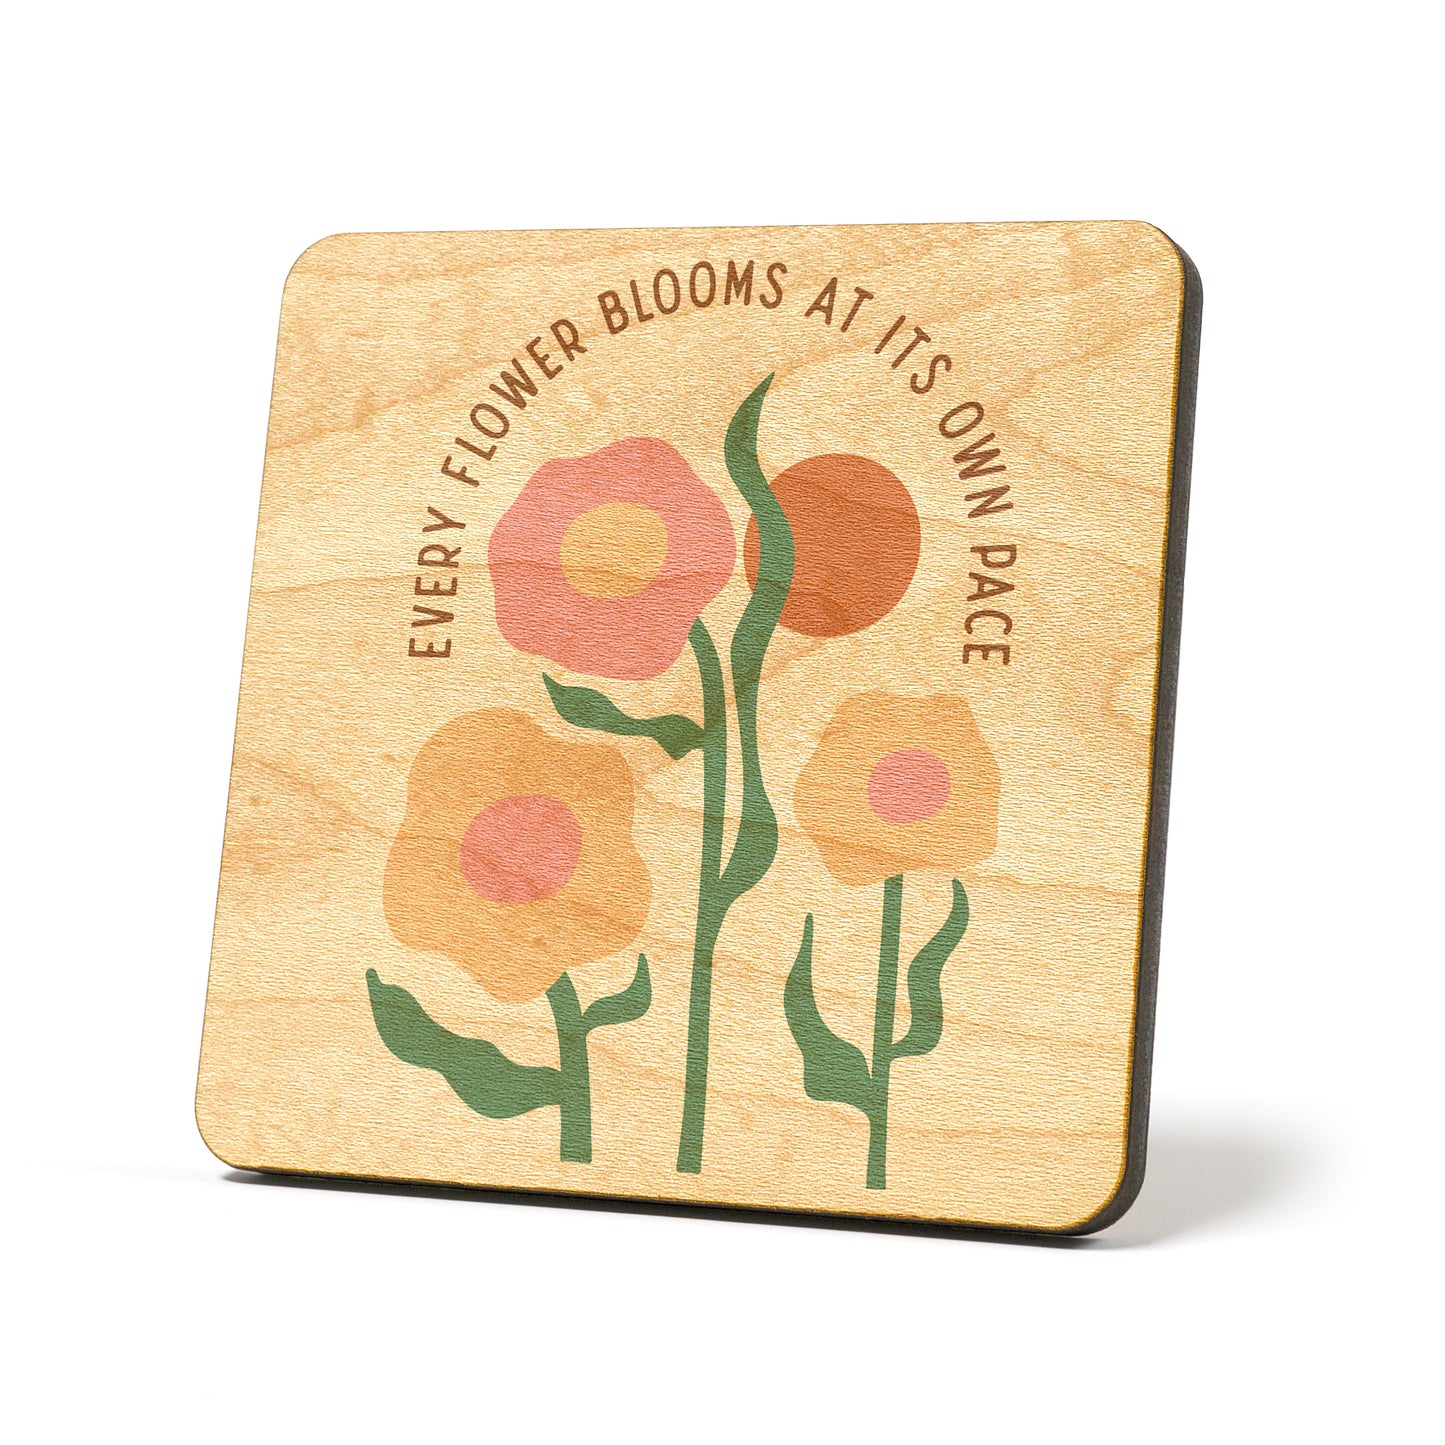 Blooms at it's own pace boho Graphic Coasters